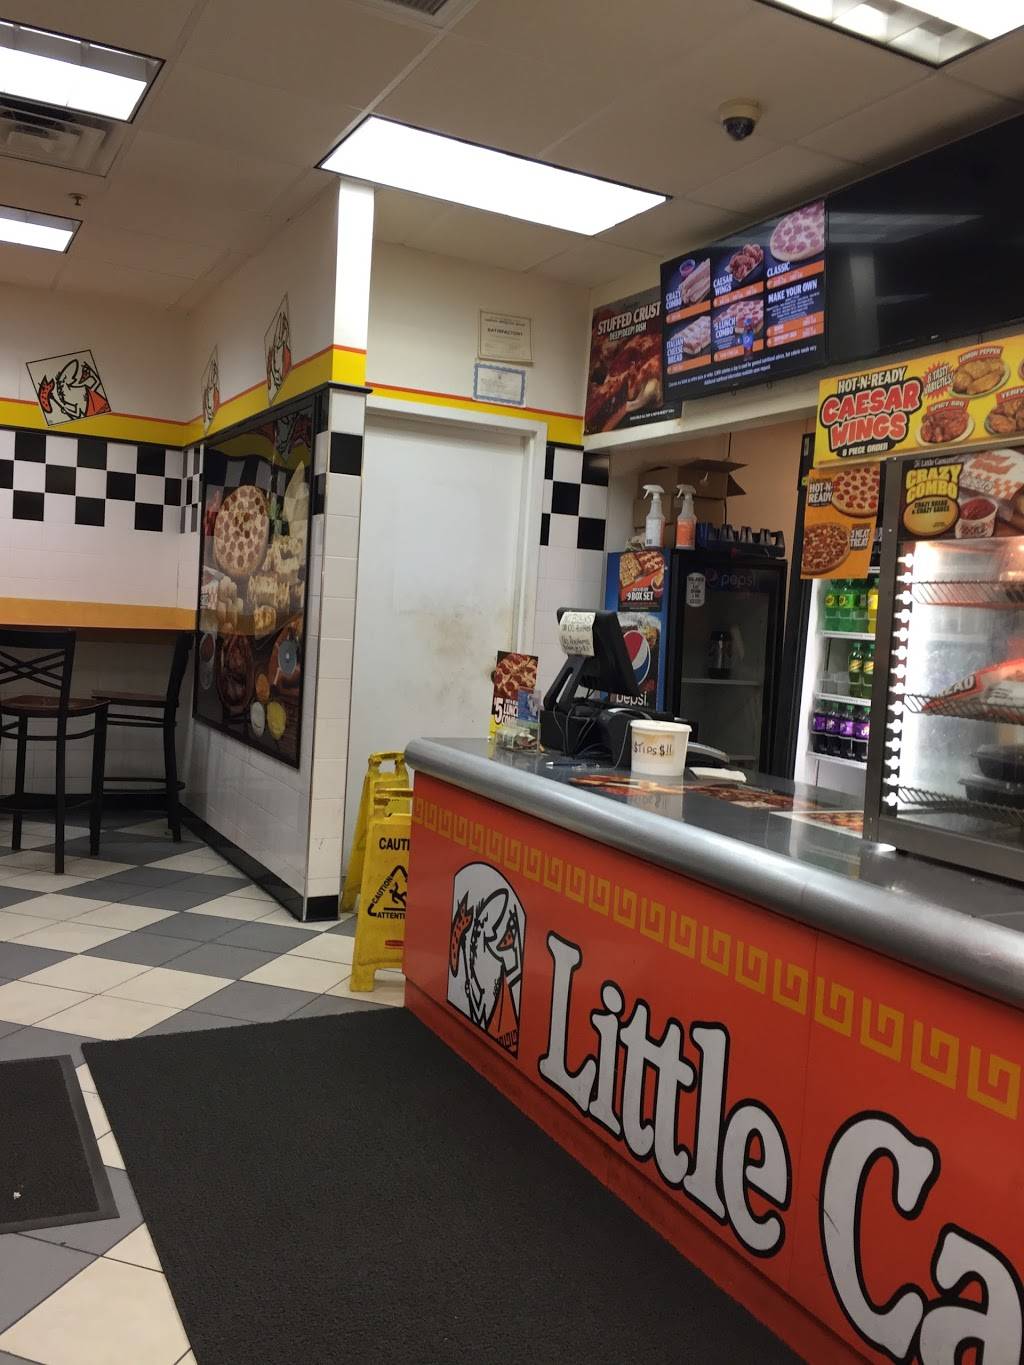 Little Caesars Pizza | meal takeaway | 4809 Park Ave, Union City, NJ 07087, USA | 2017585828 OR +1 201-758-5828